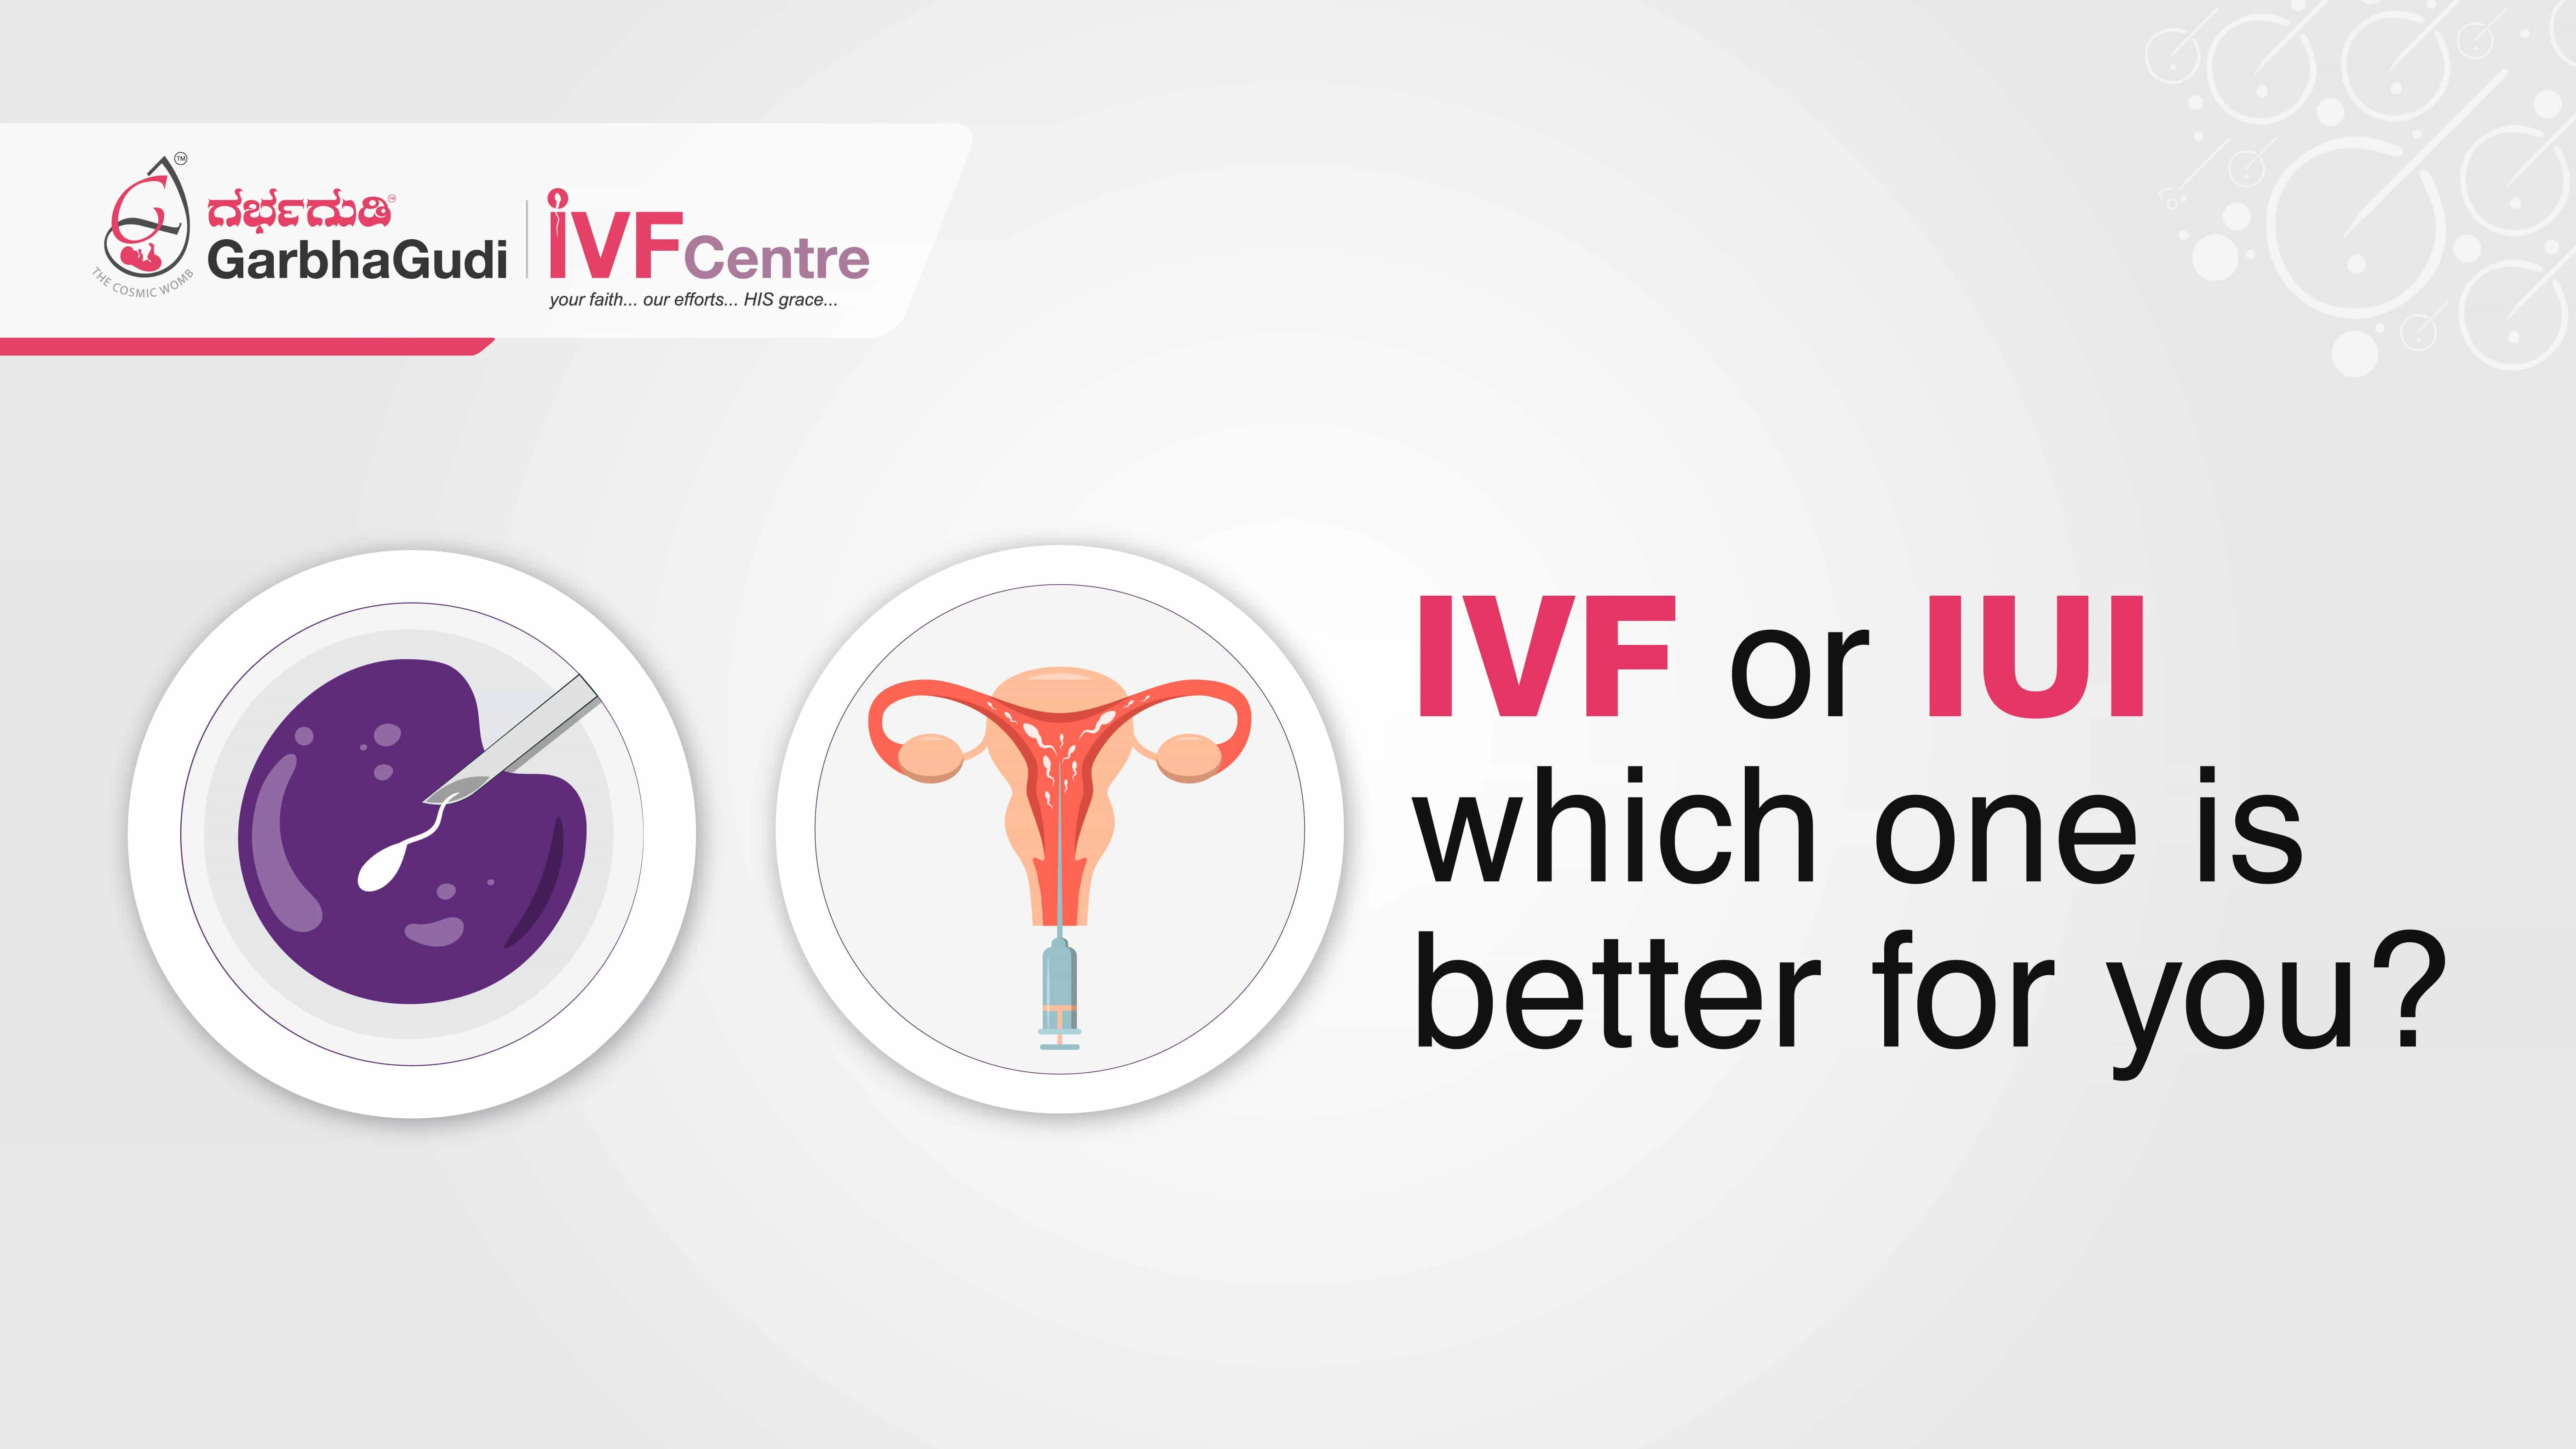 IVF or IUI, which one is better for you?